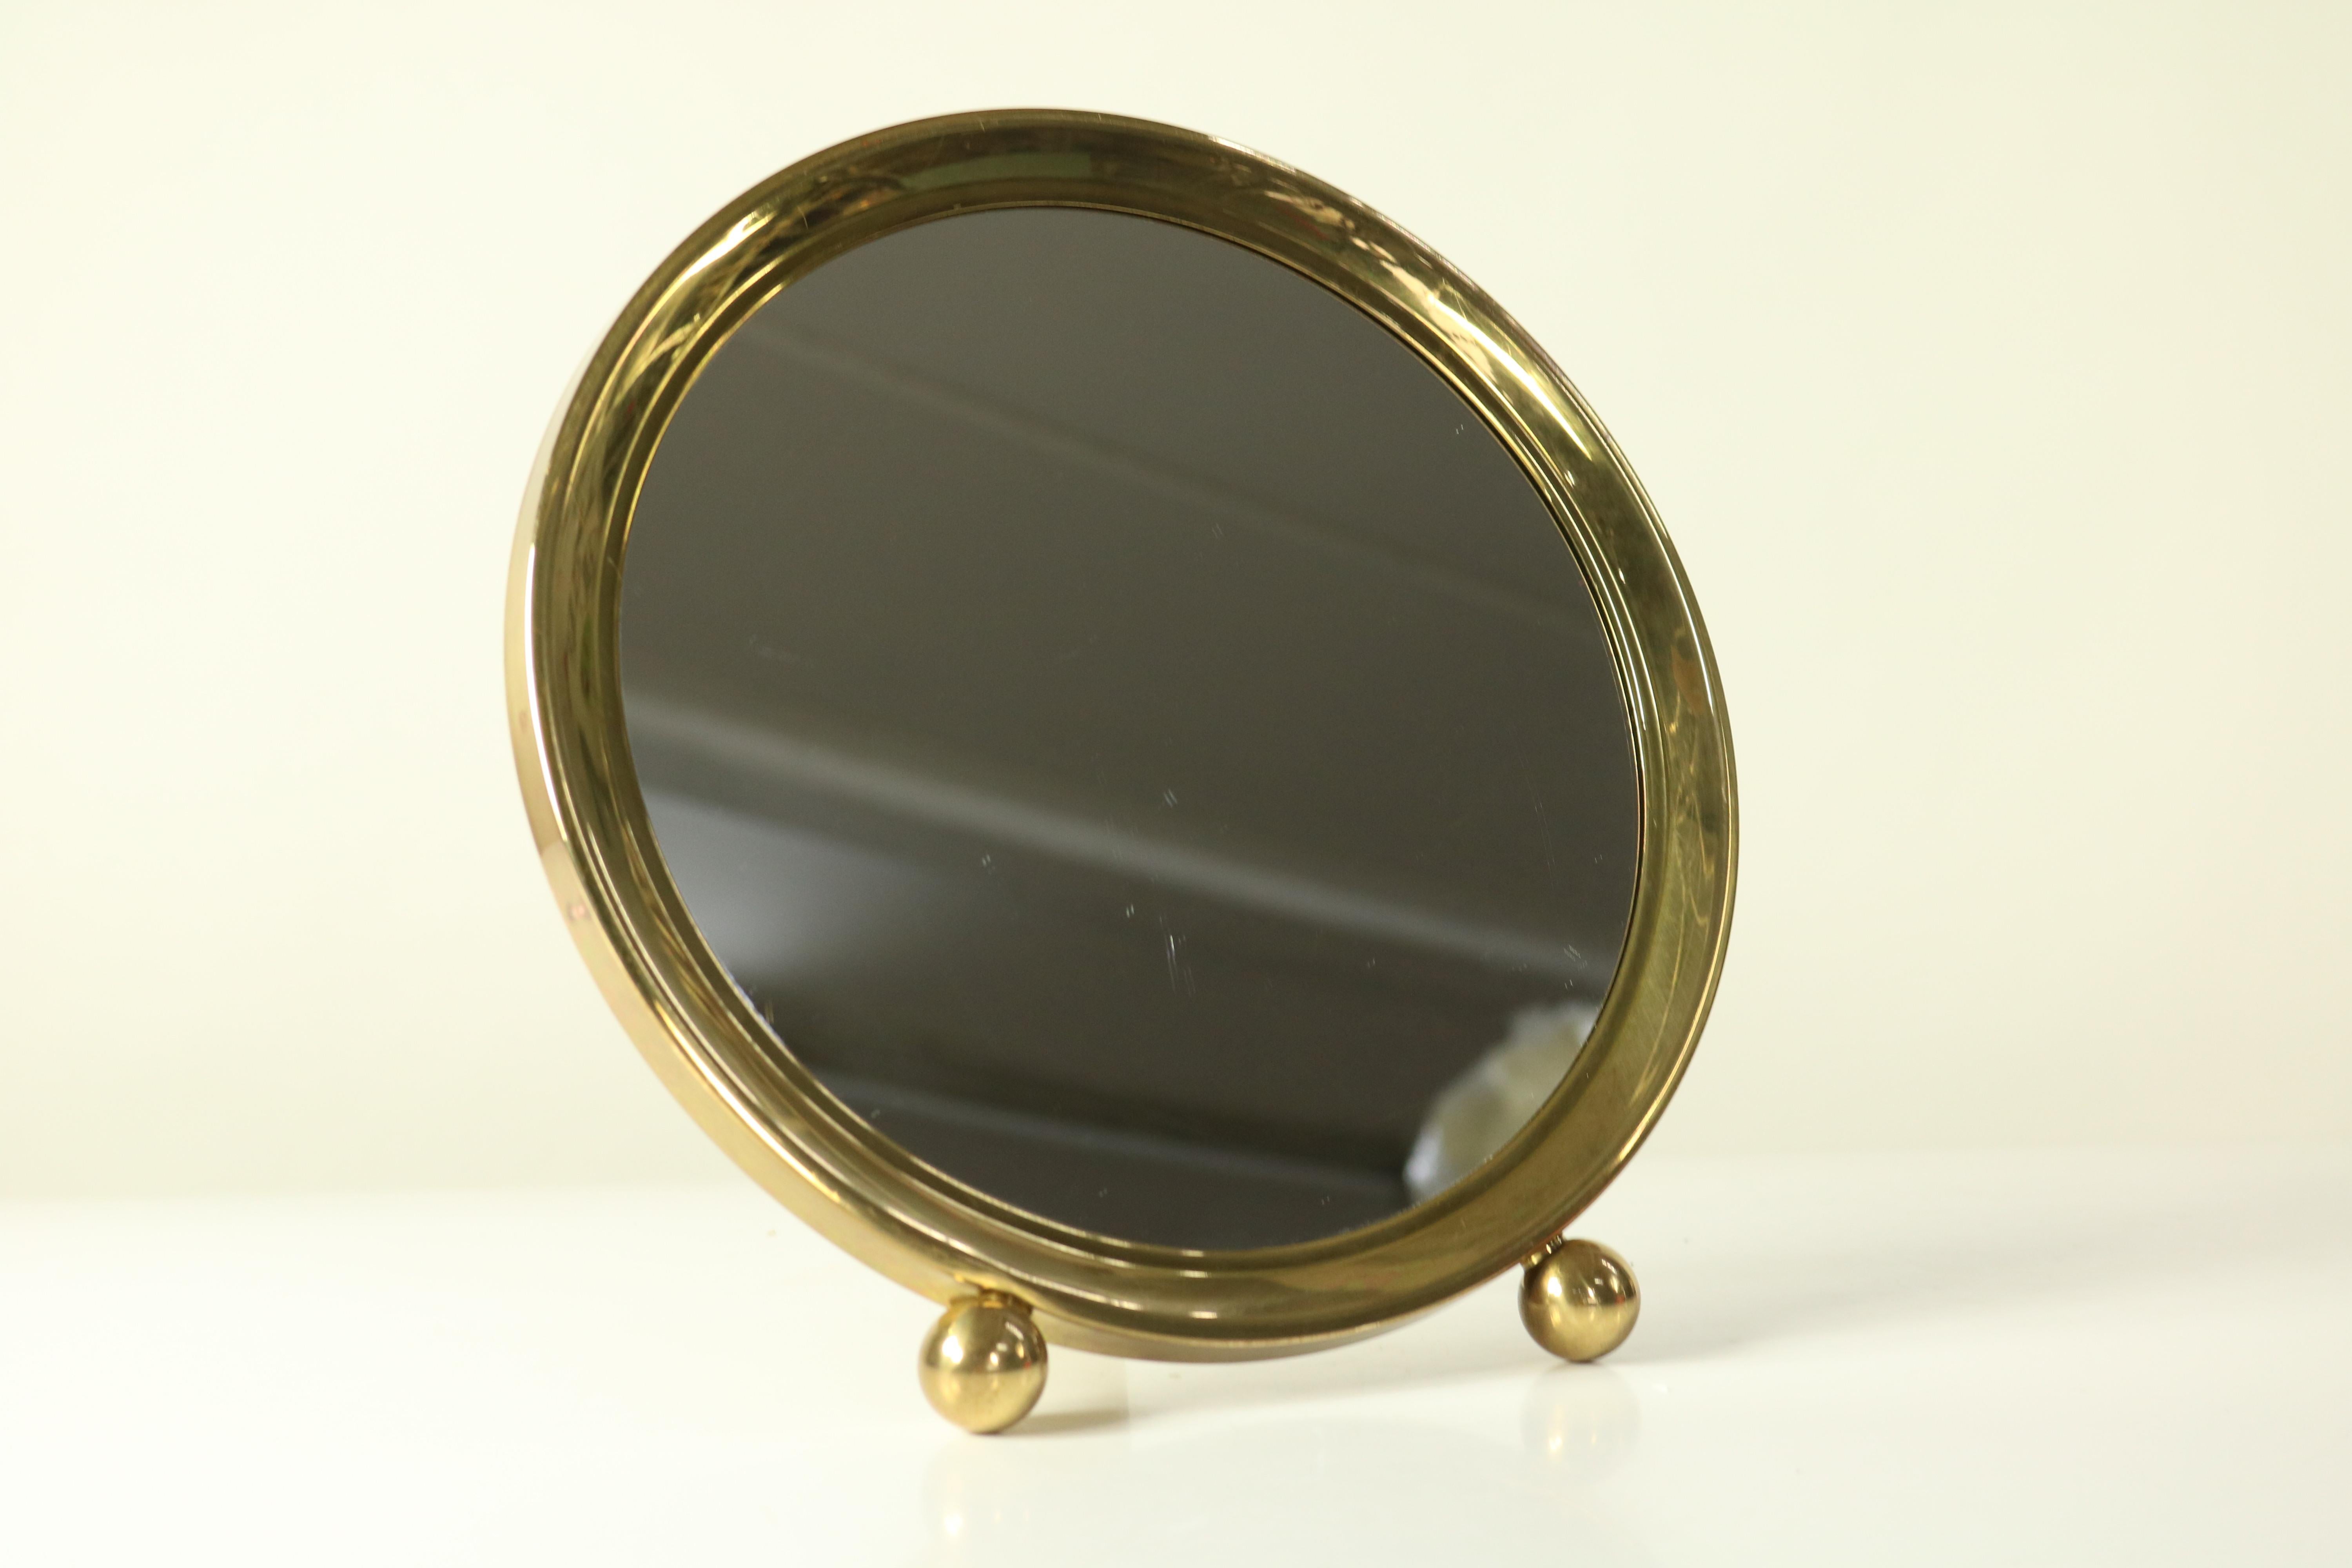 Art Deco Table Stand or Wall Mirror Brass Ball Feet VTG, 1940s-1950s For Sale 1